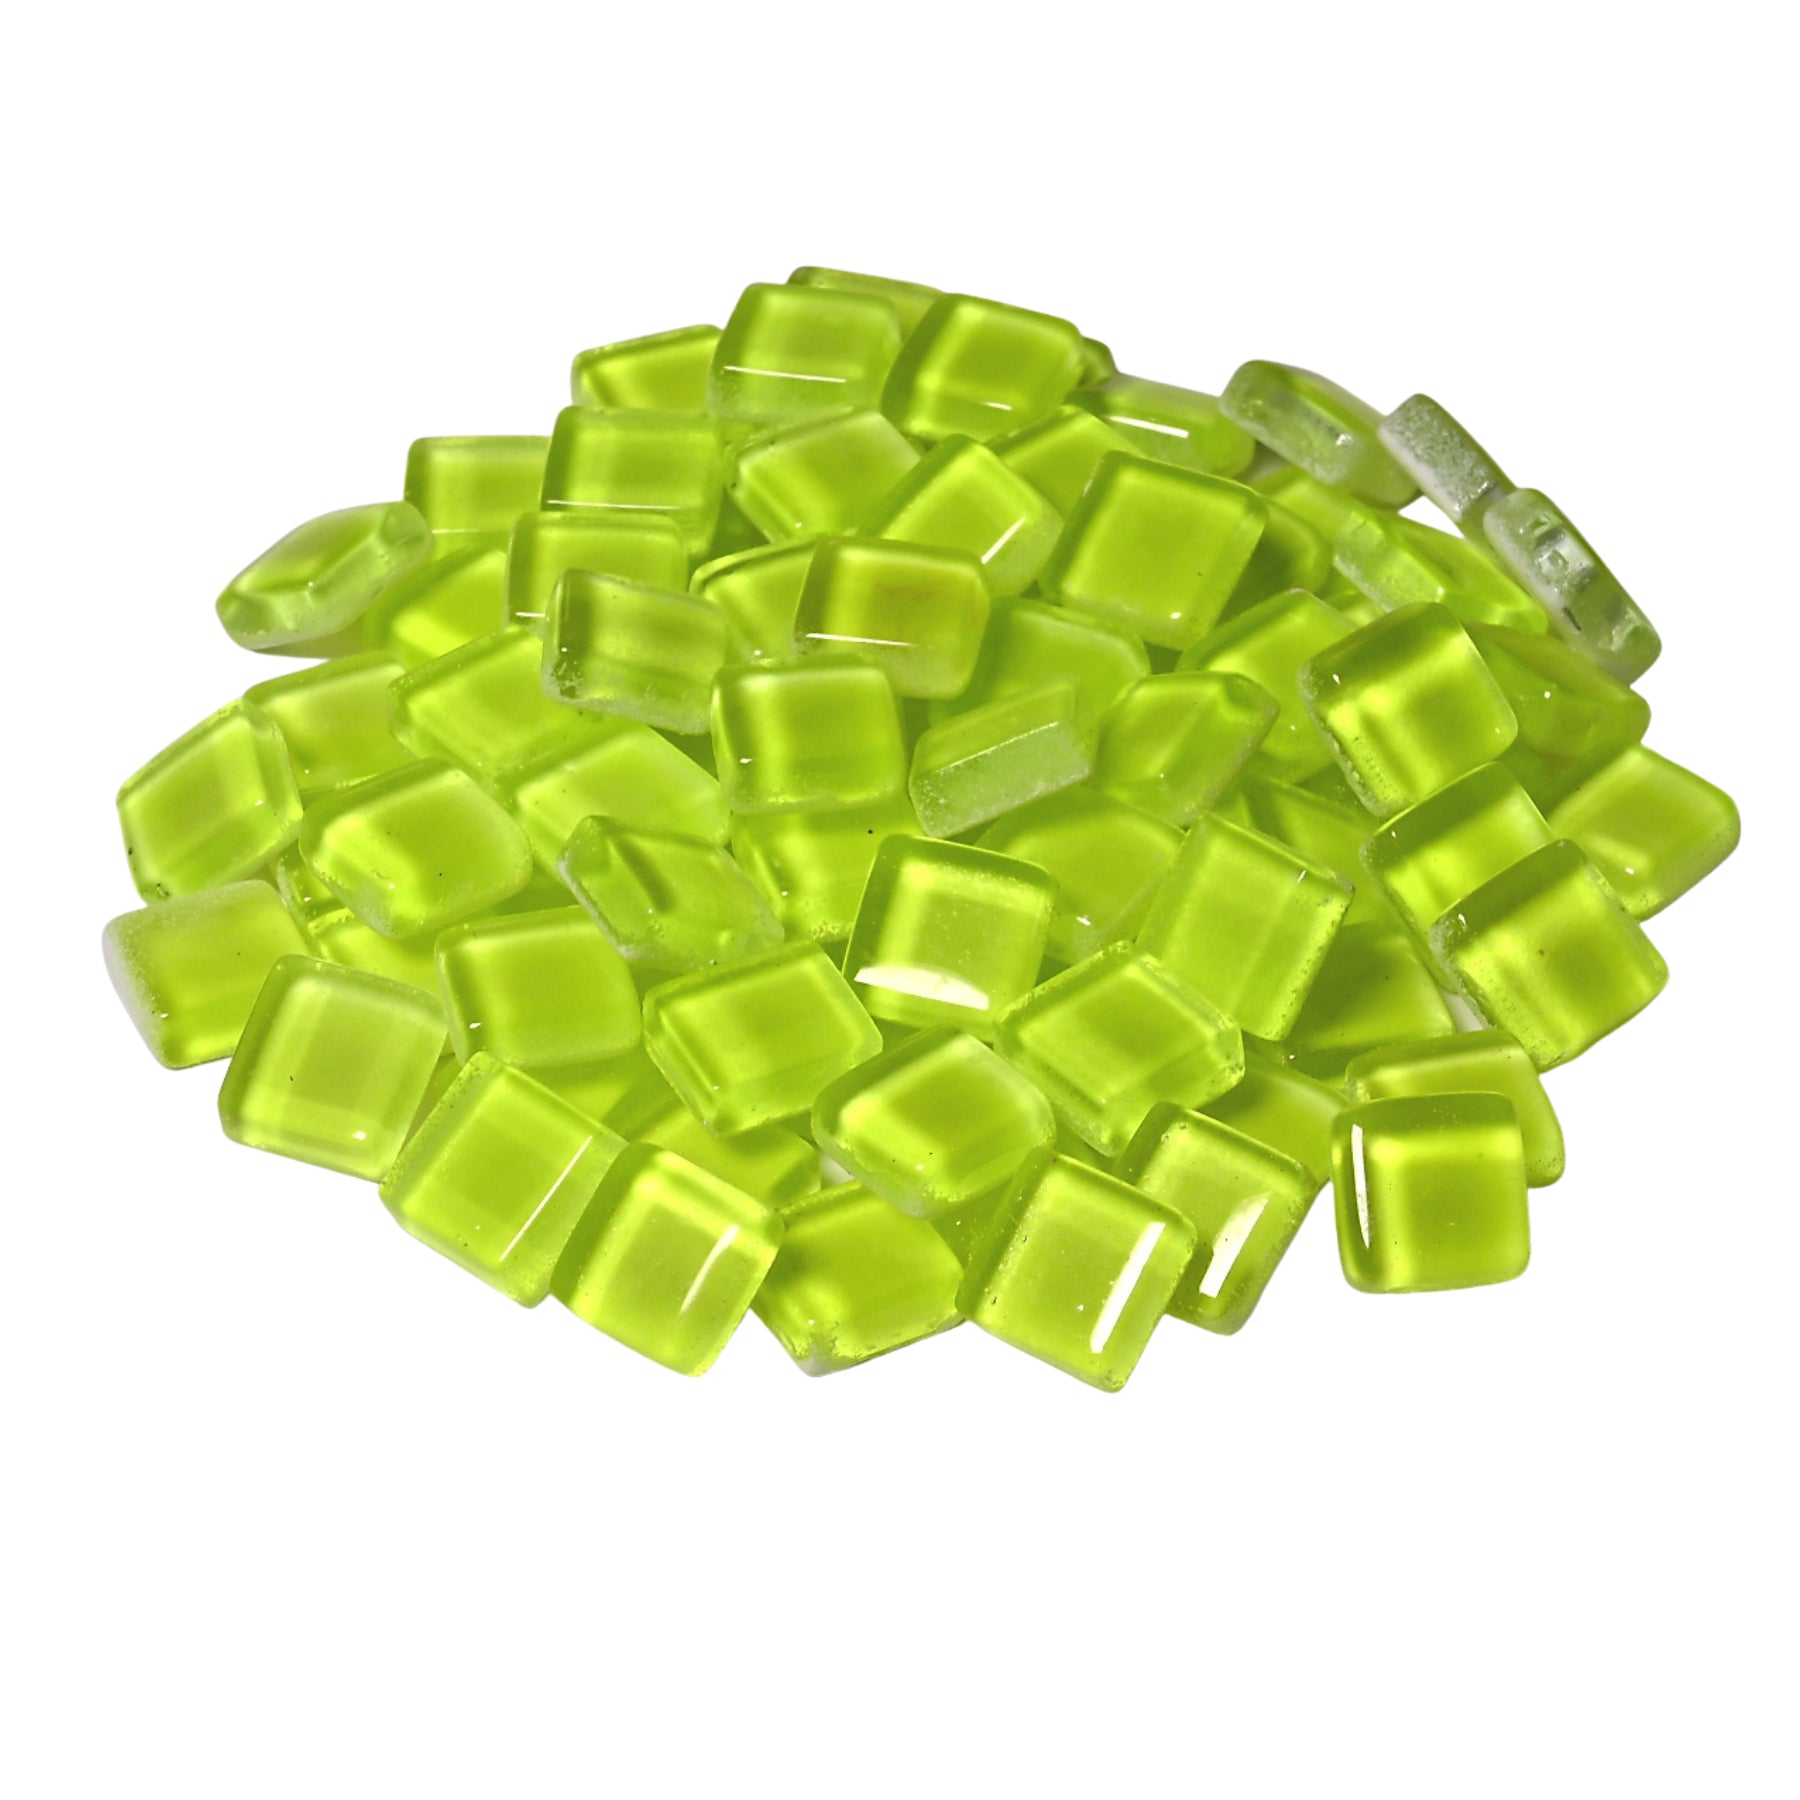 Soft Glass Squares - Yellow Glow In The Dark